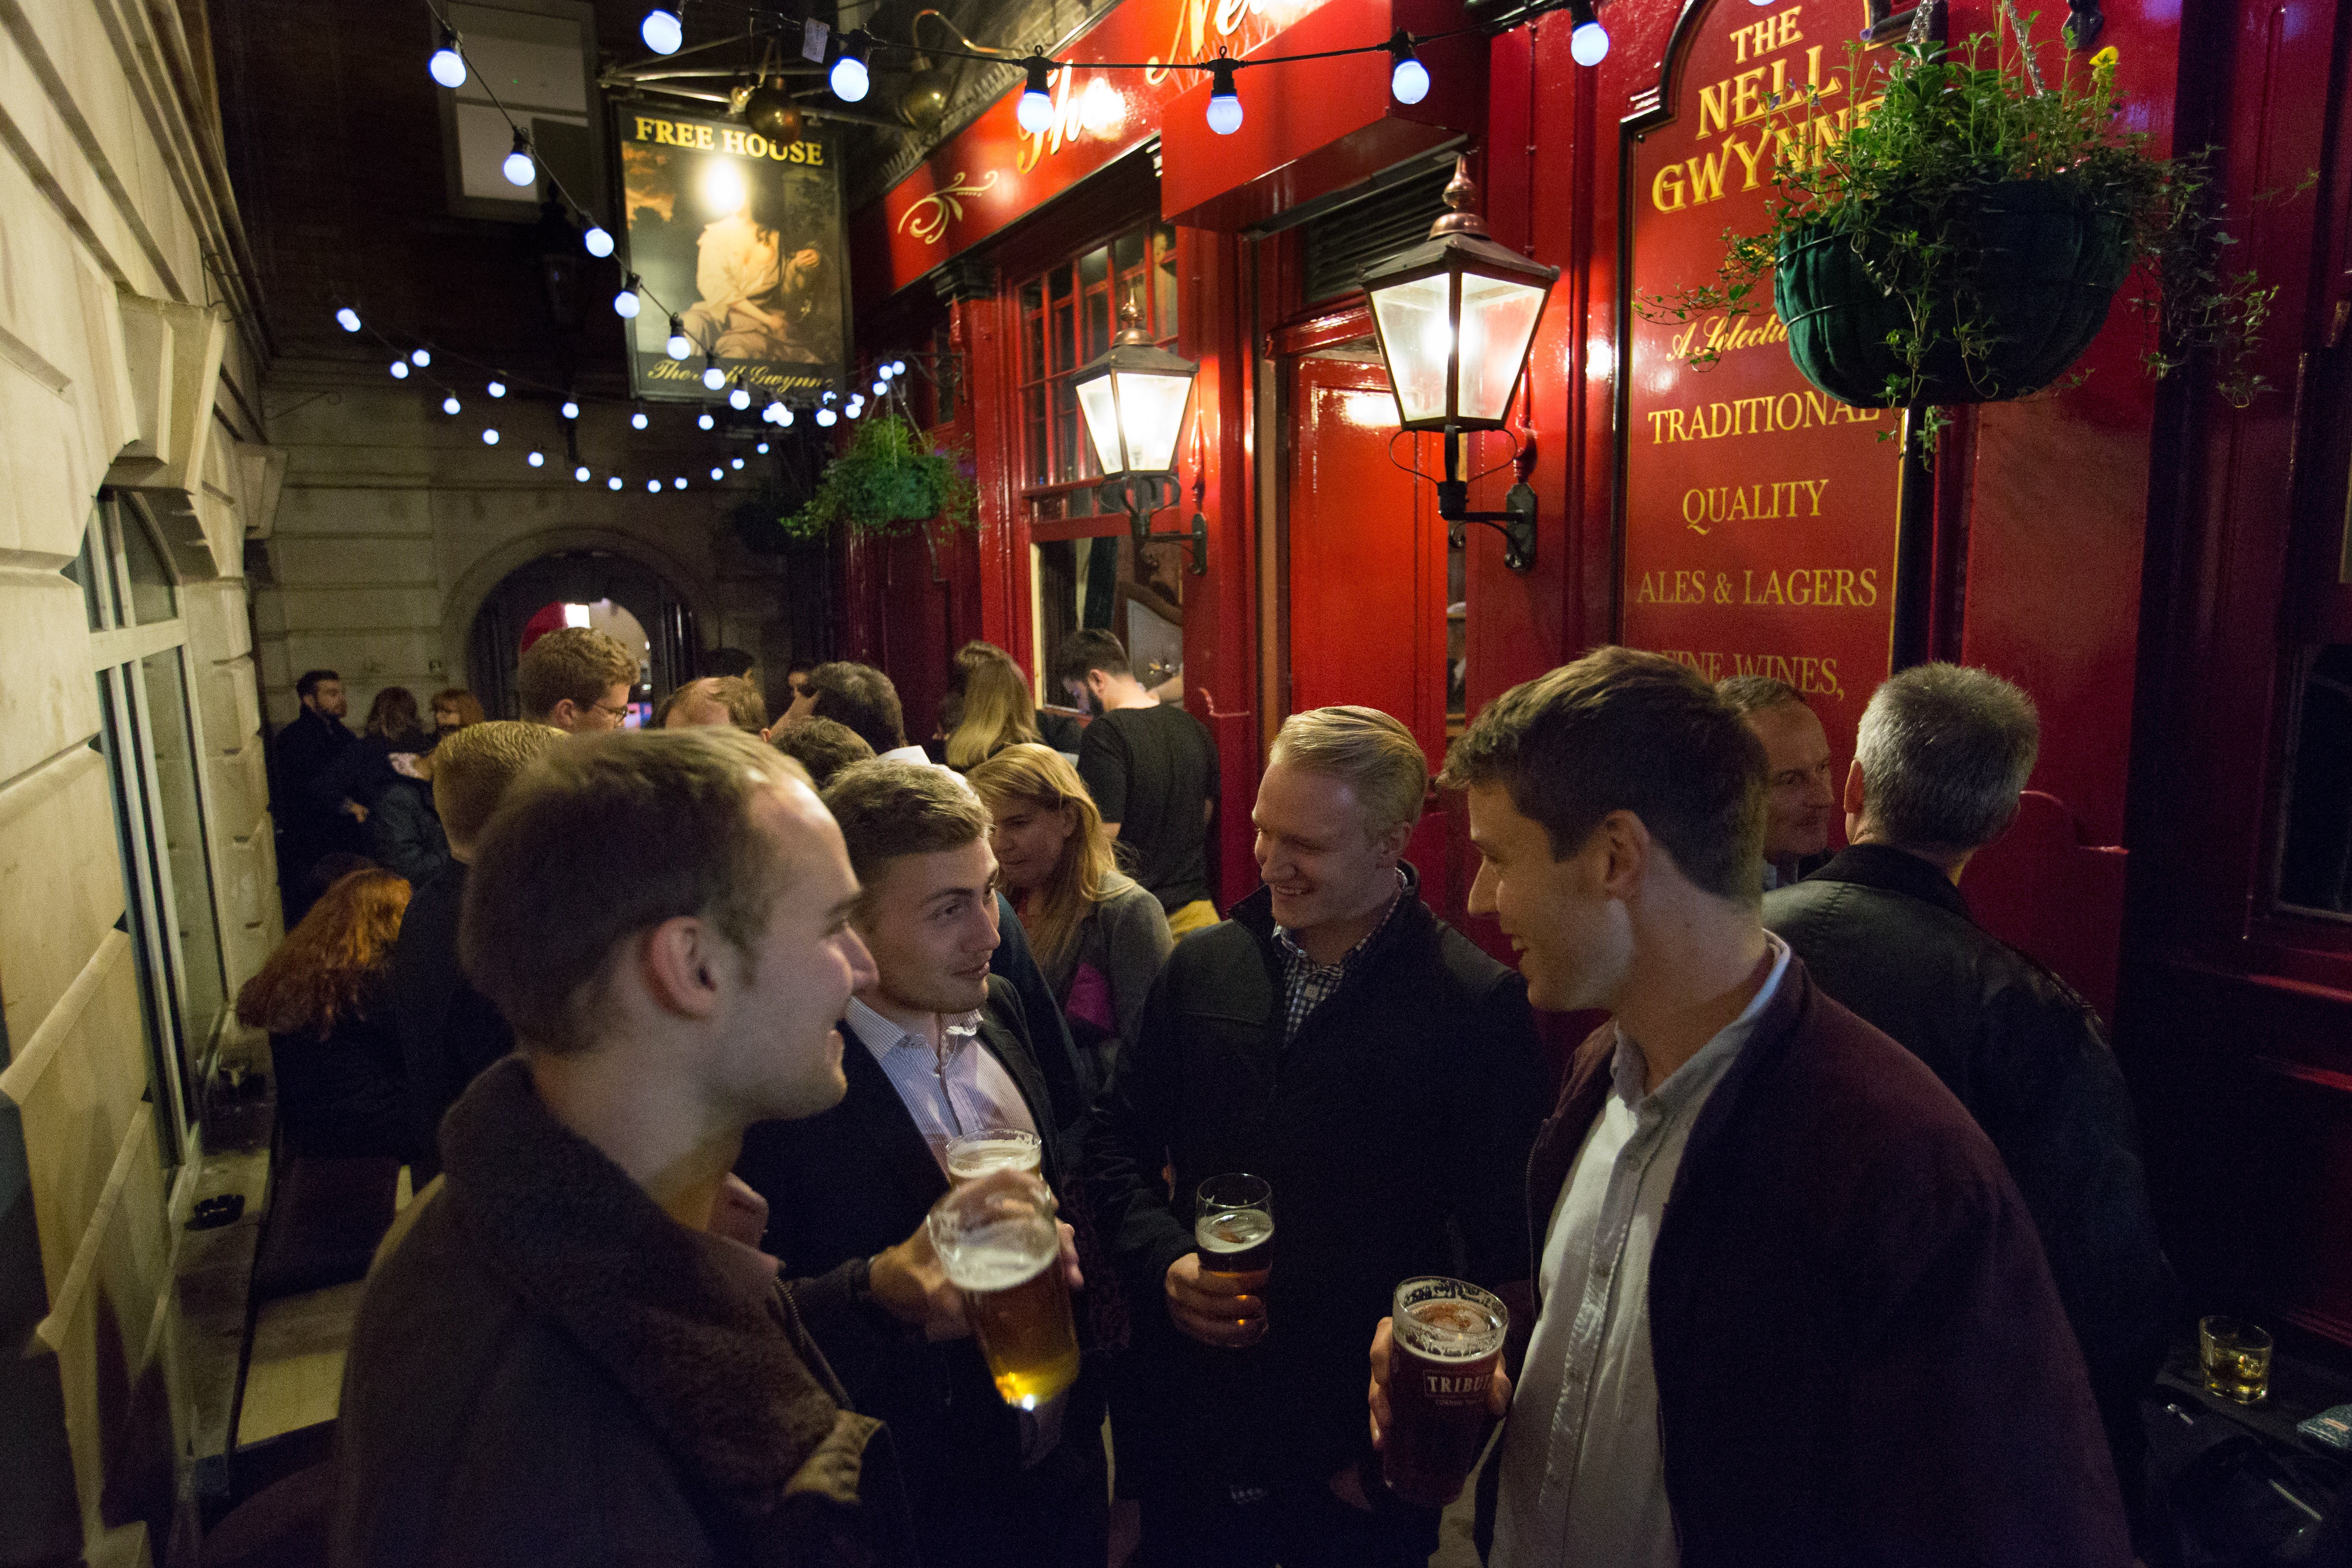 The Nell Gwynne Tavern in Covent Garden, one of City Pub Group’s locations (City Pub Group/PA)